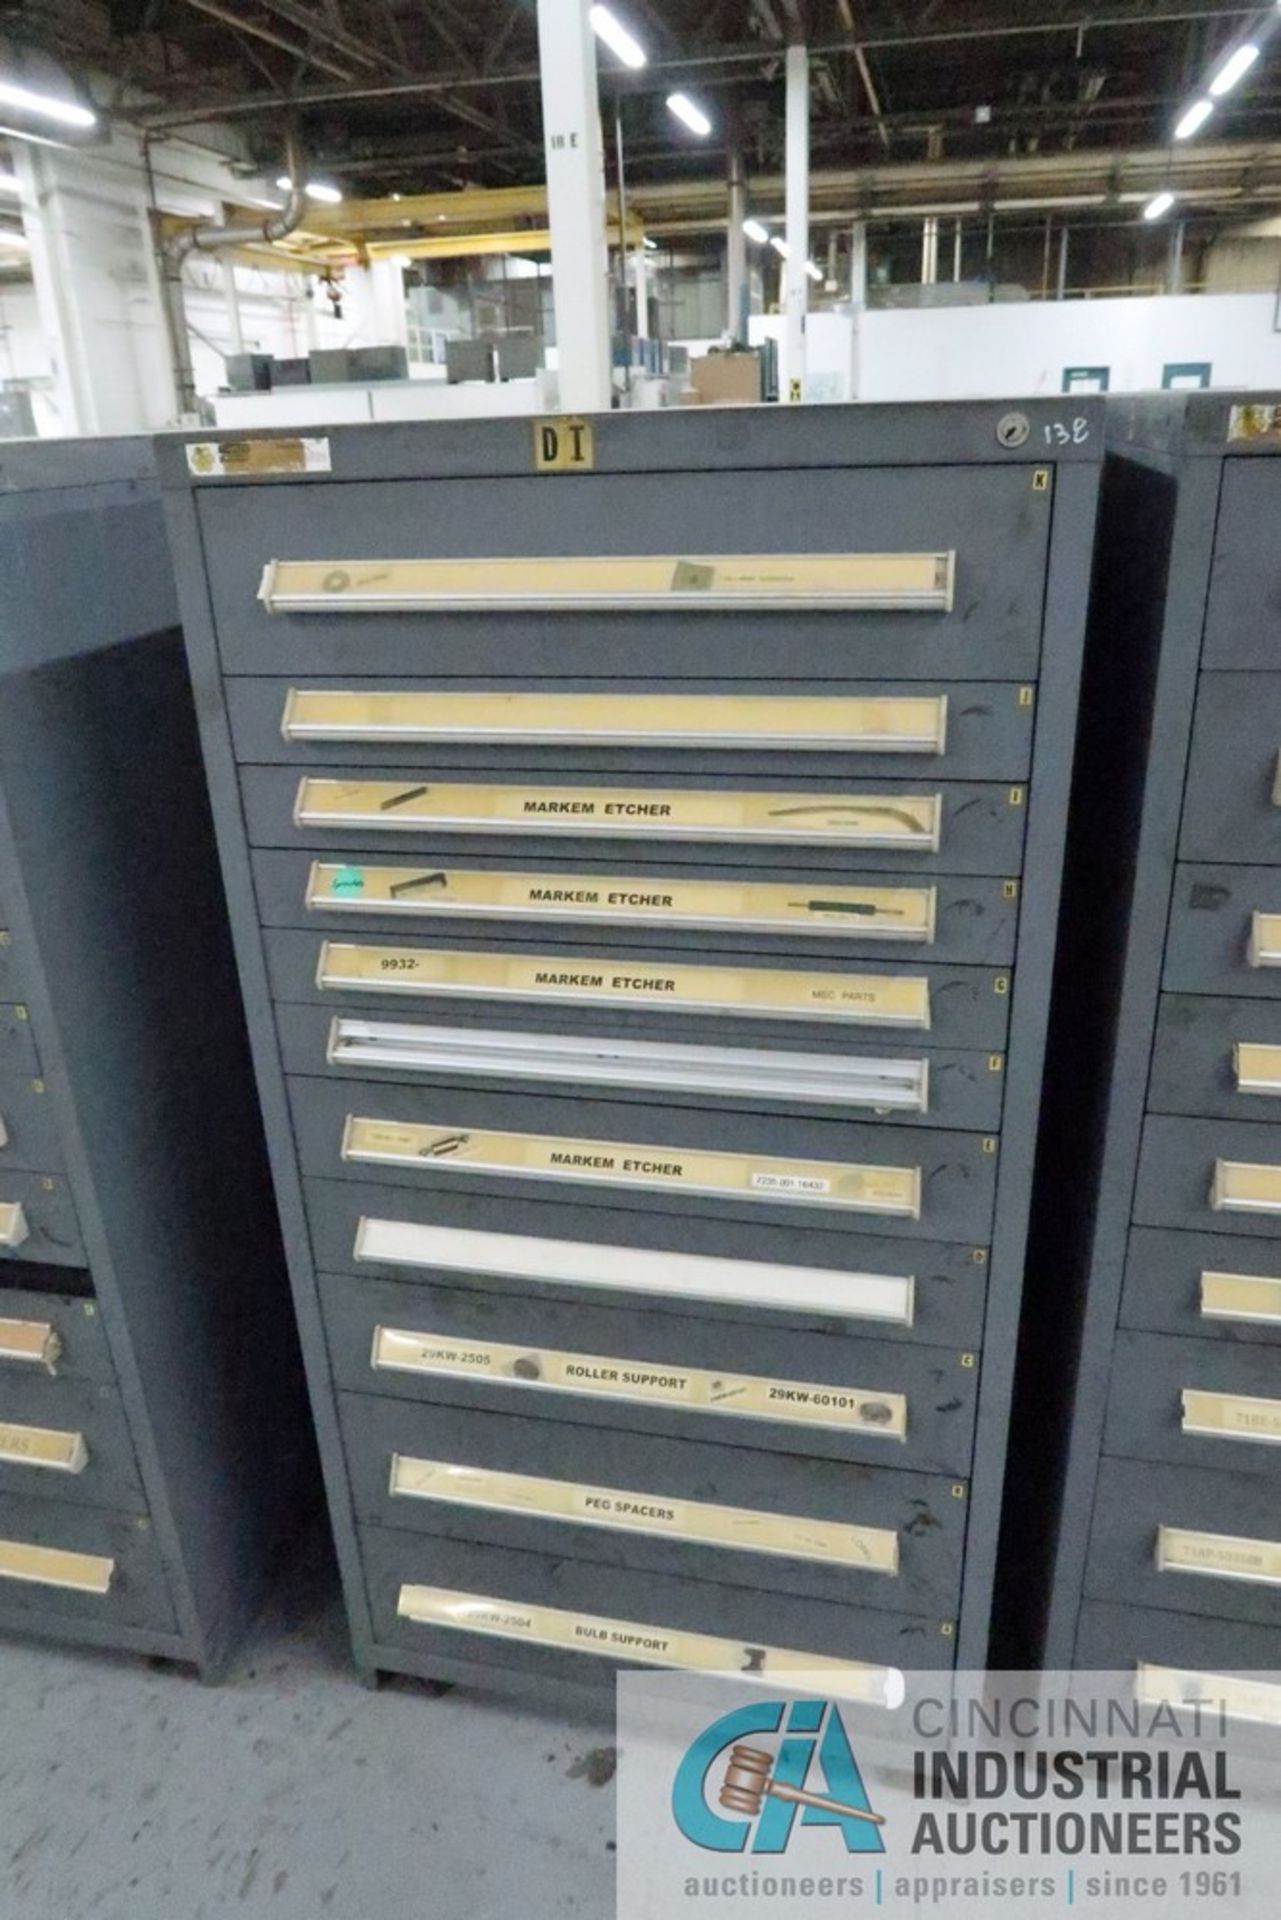 11-DRAWER VIDMAR CABINET WITH CONTENTS INCLUDING MISCELLANEOUS MARKER ETCHER PARTS, KNIVES,